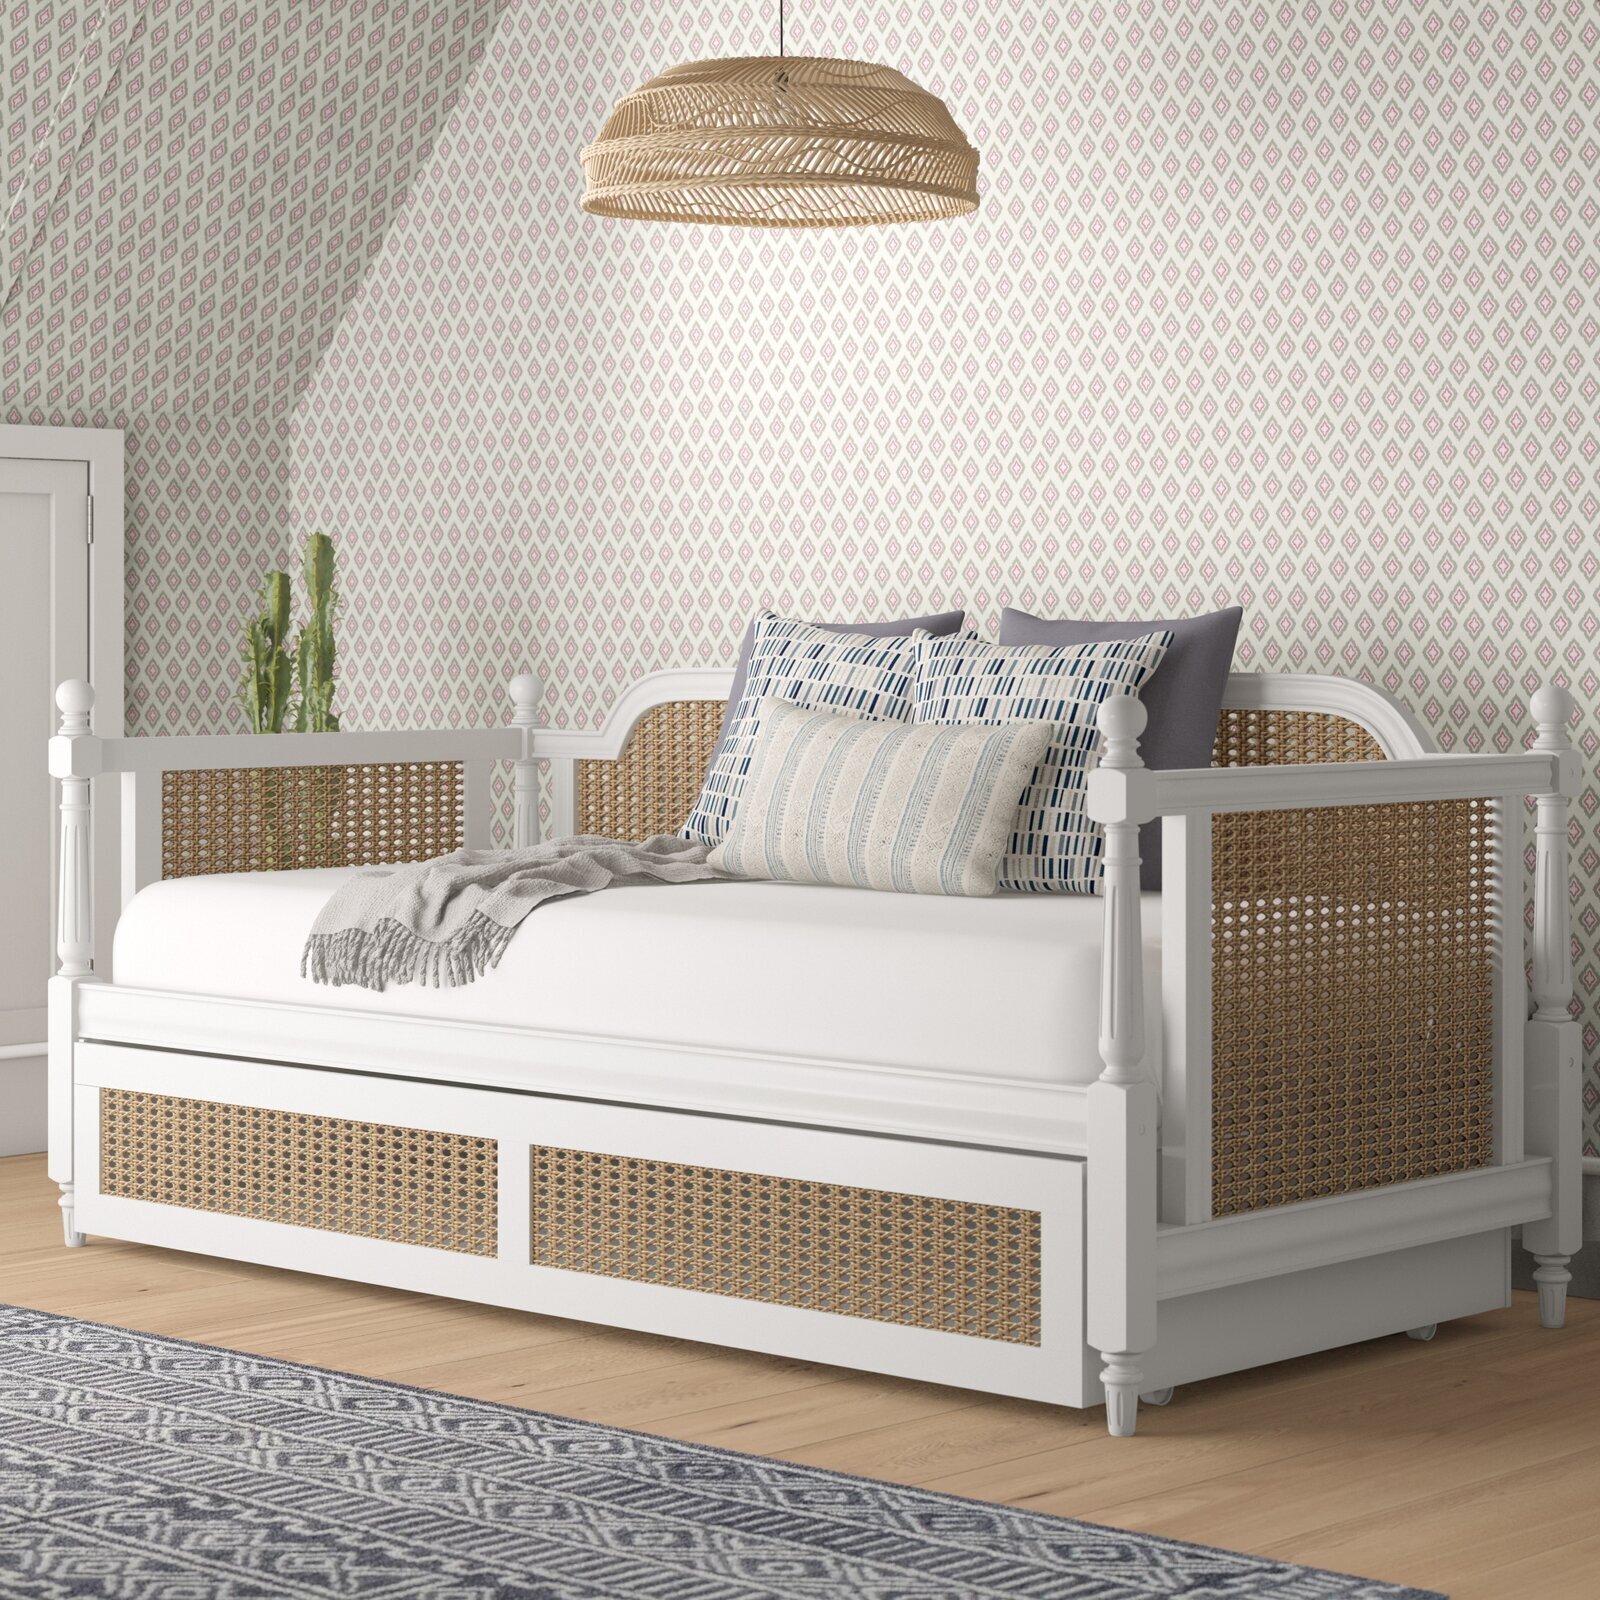 Ornate Wooden Daybed Frame With Trundle